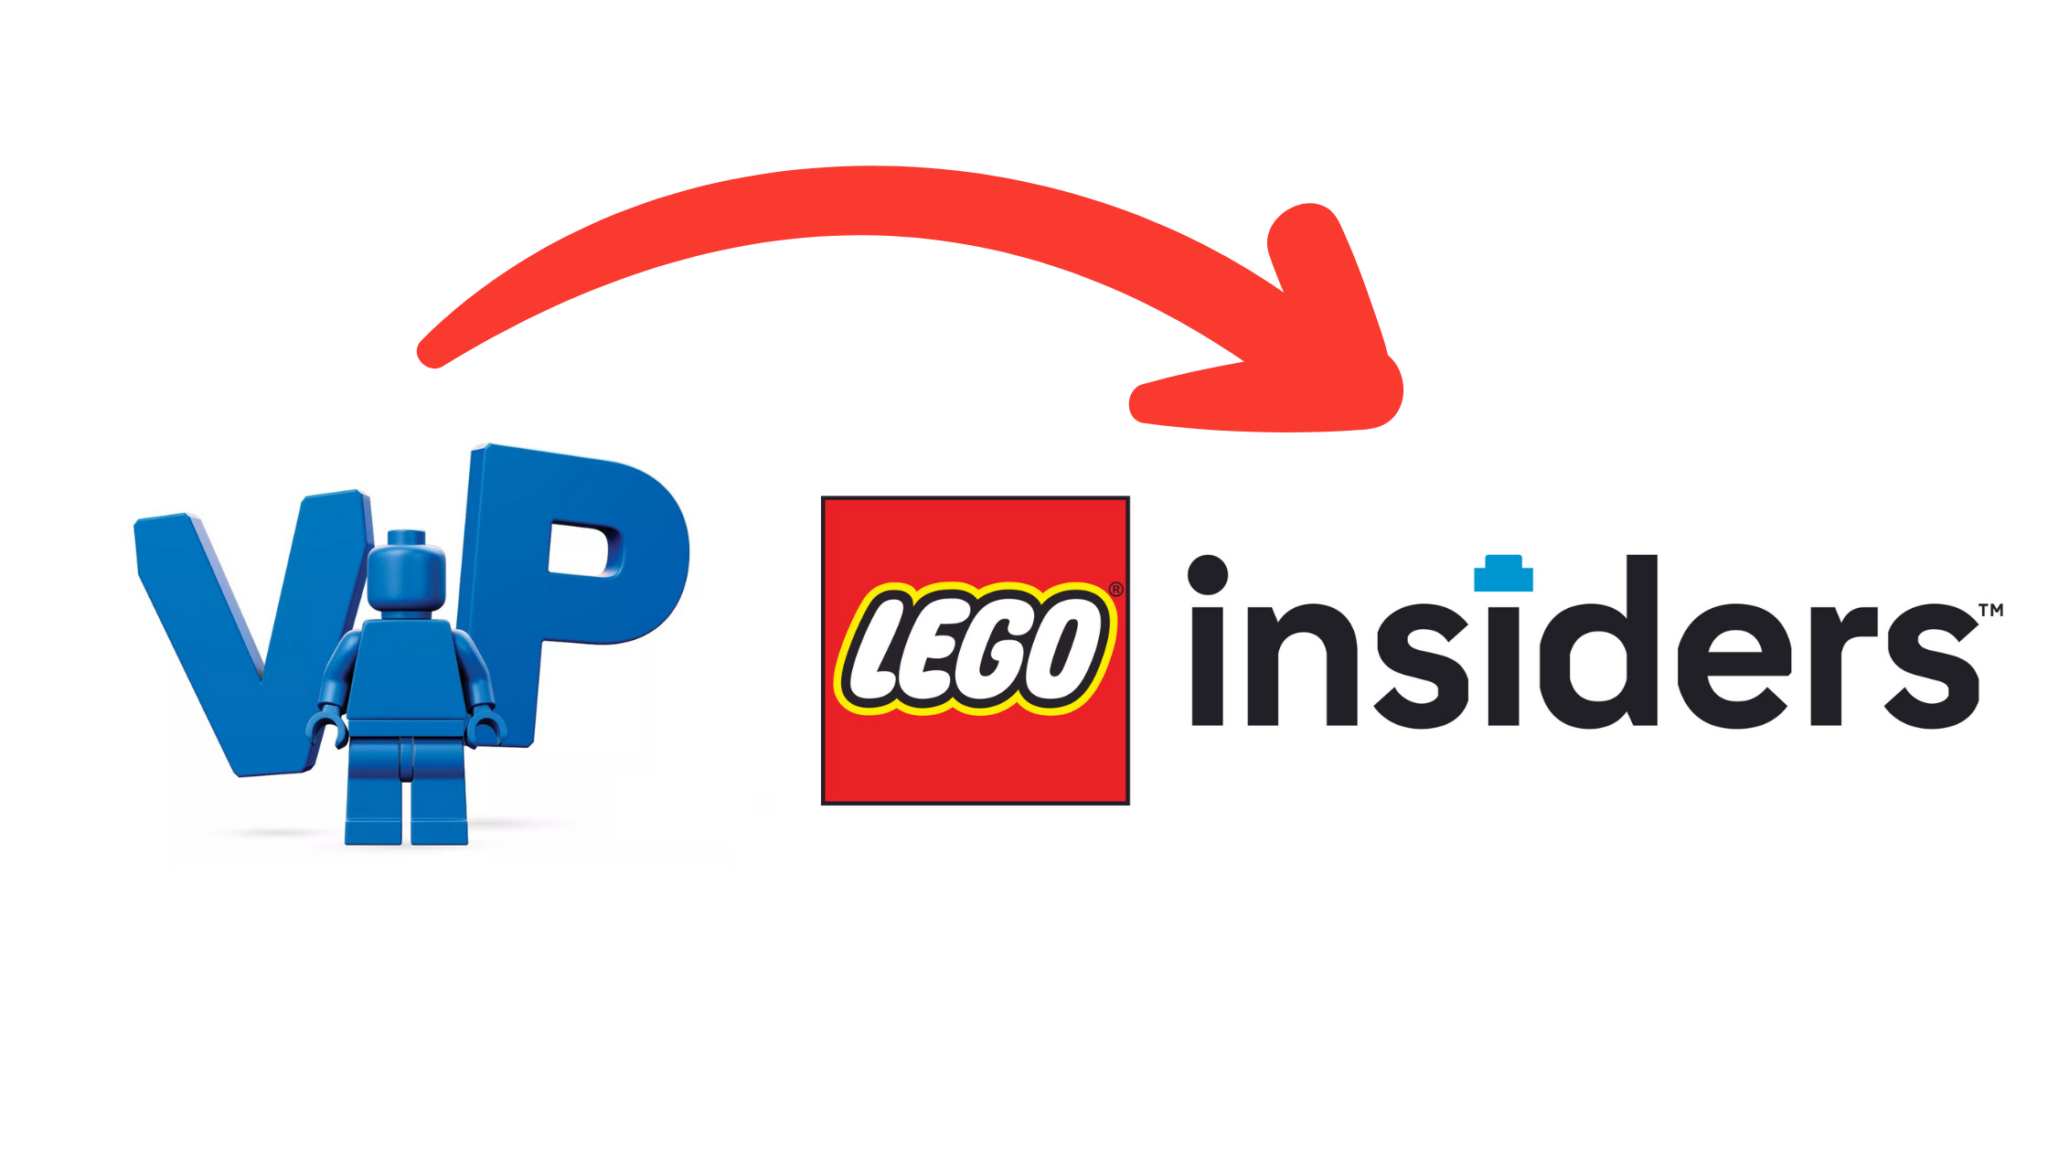 LEGO's VIP Program is being rebranded to LEGO Insiders - Jay's Brick Blog